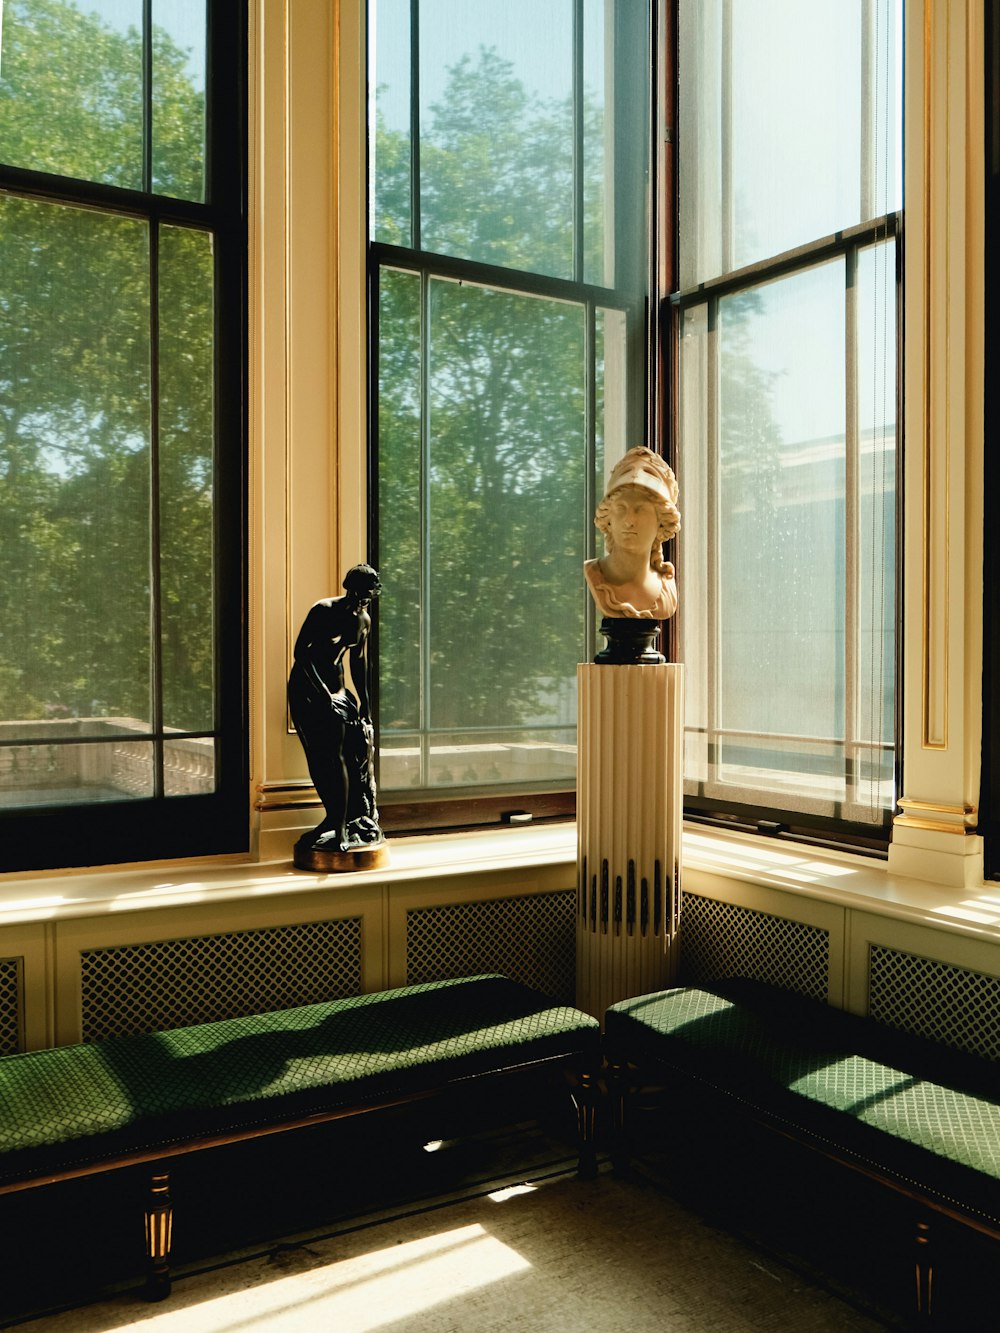 a statue of a man sitting on a bench next to a window